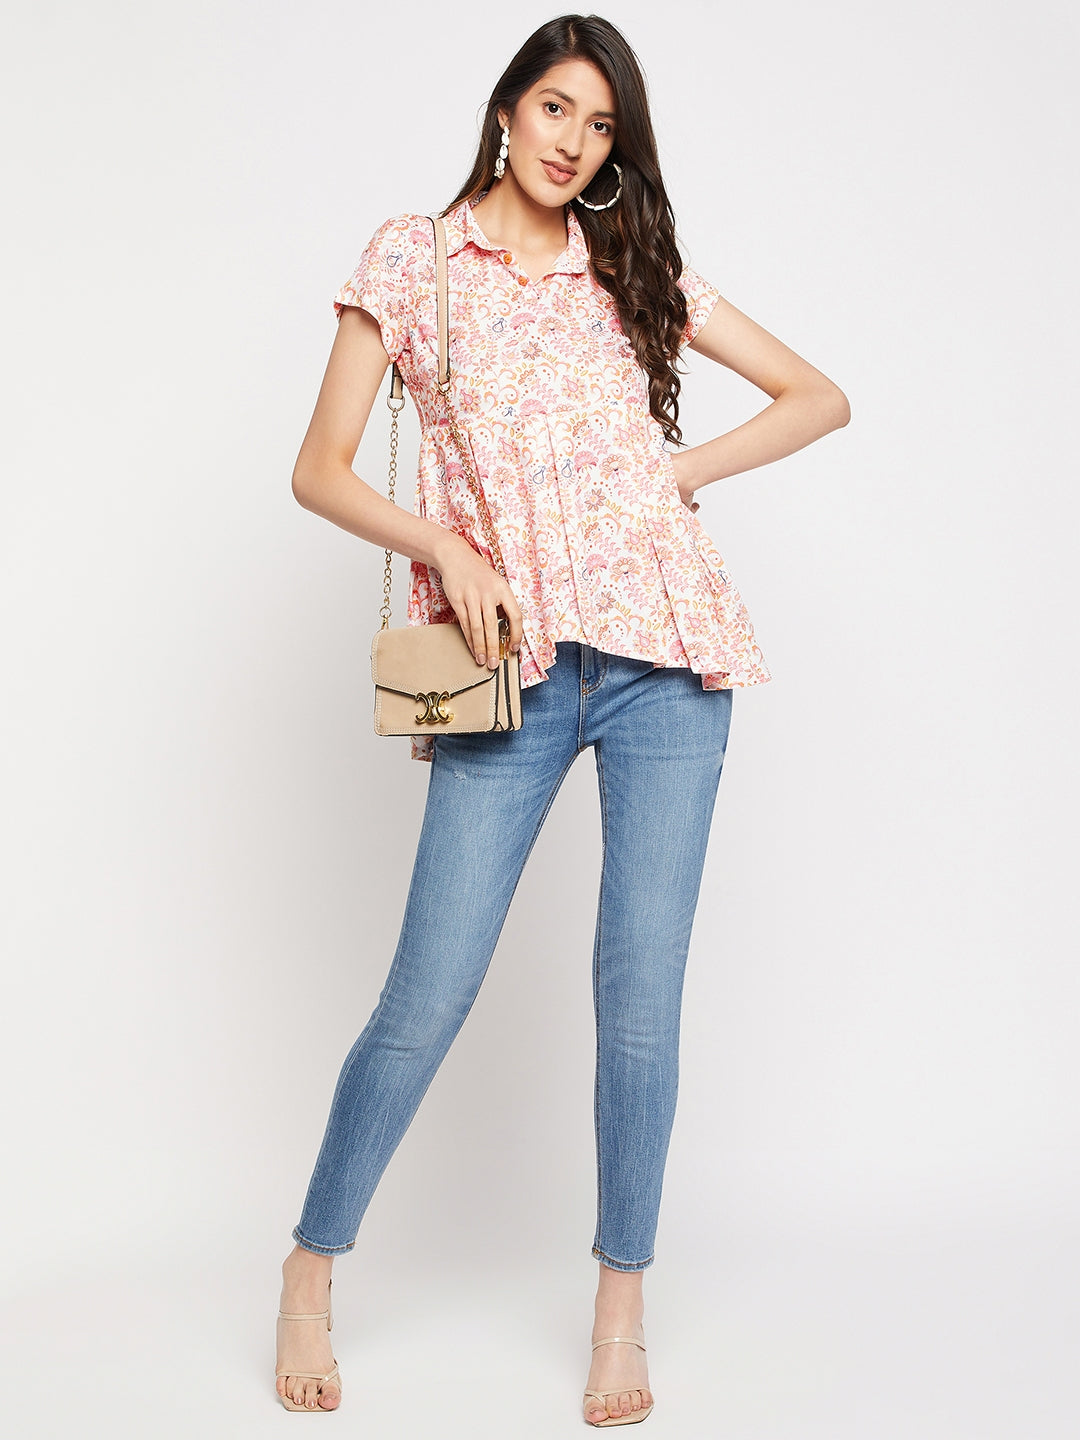 White Rayon Blend Floral Printed Shirt Style Flared Tunic